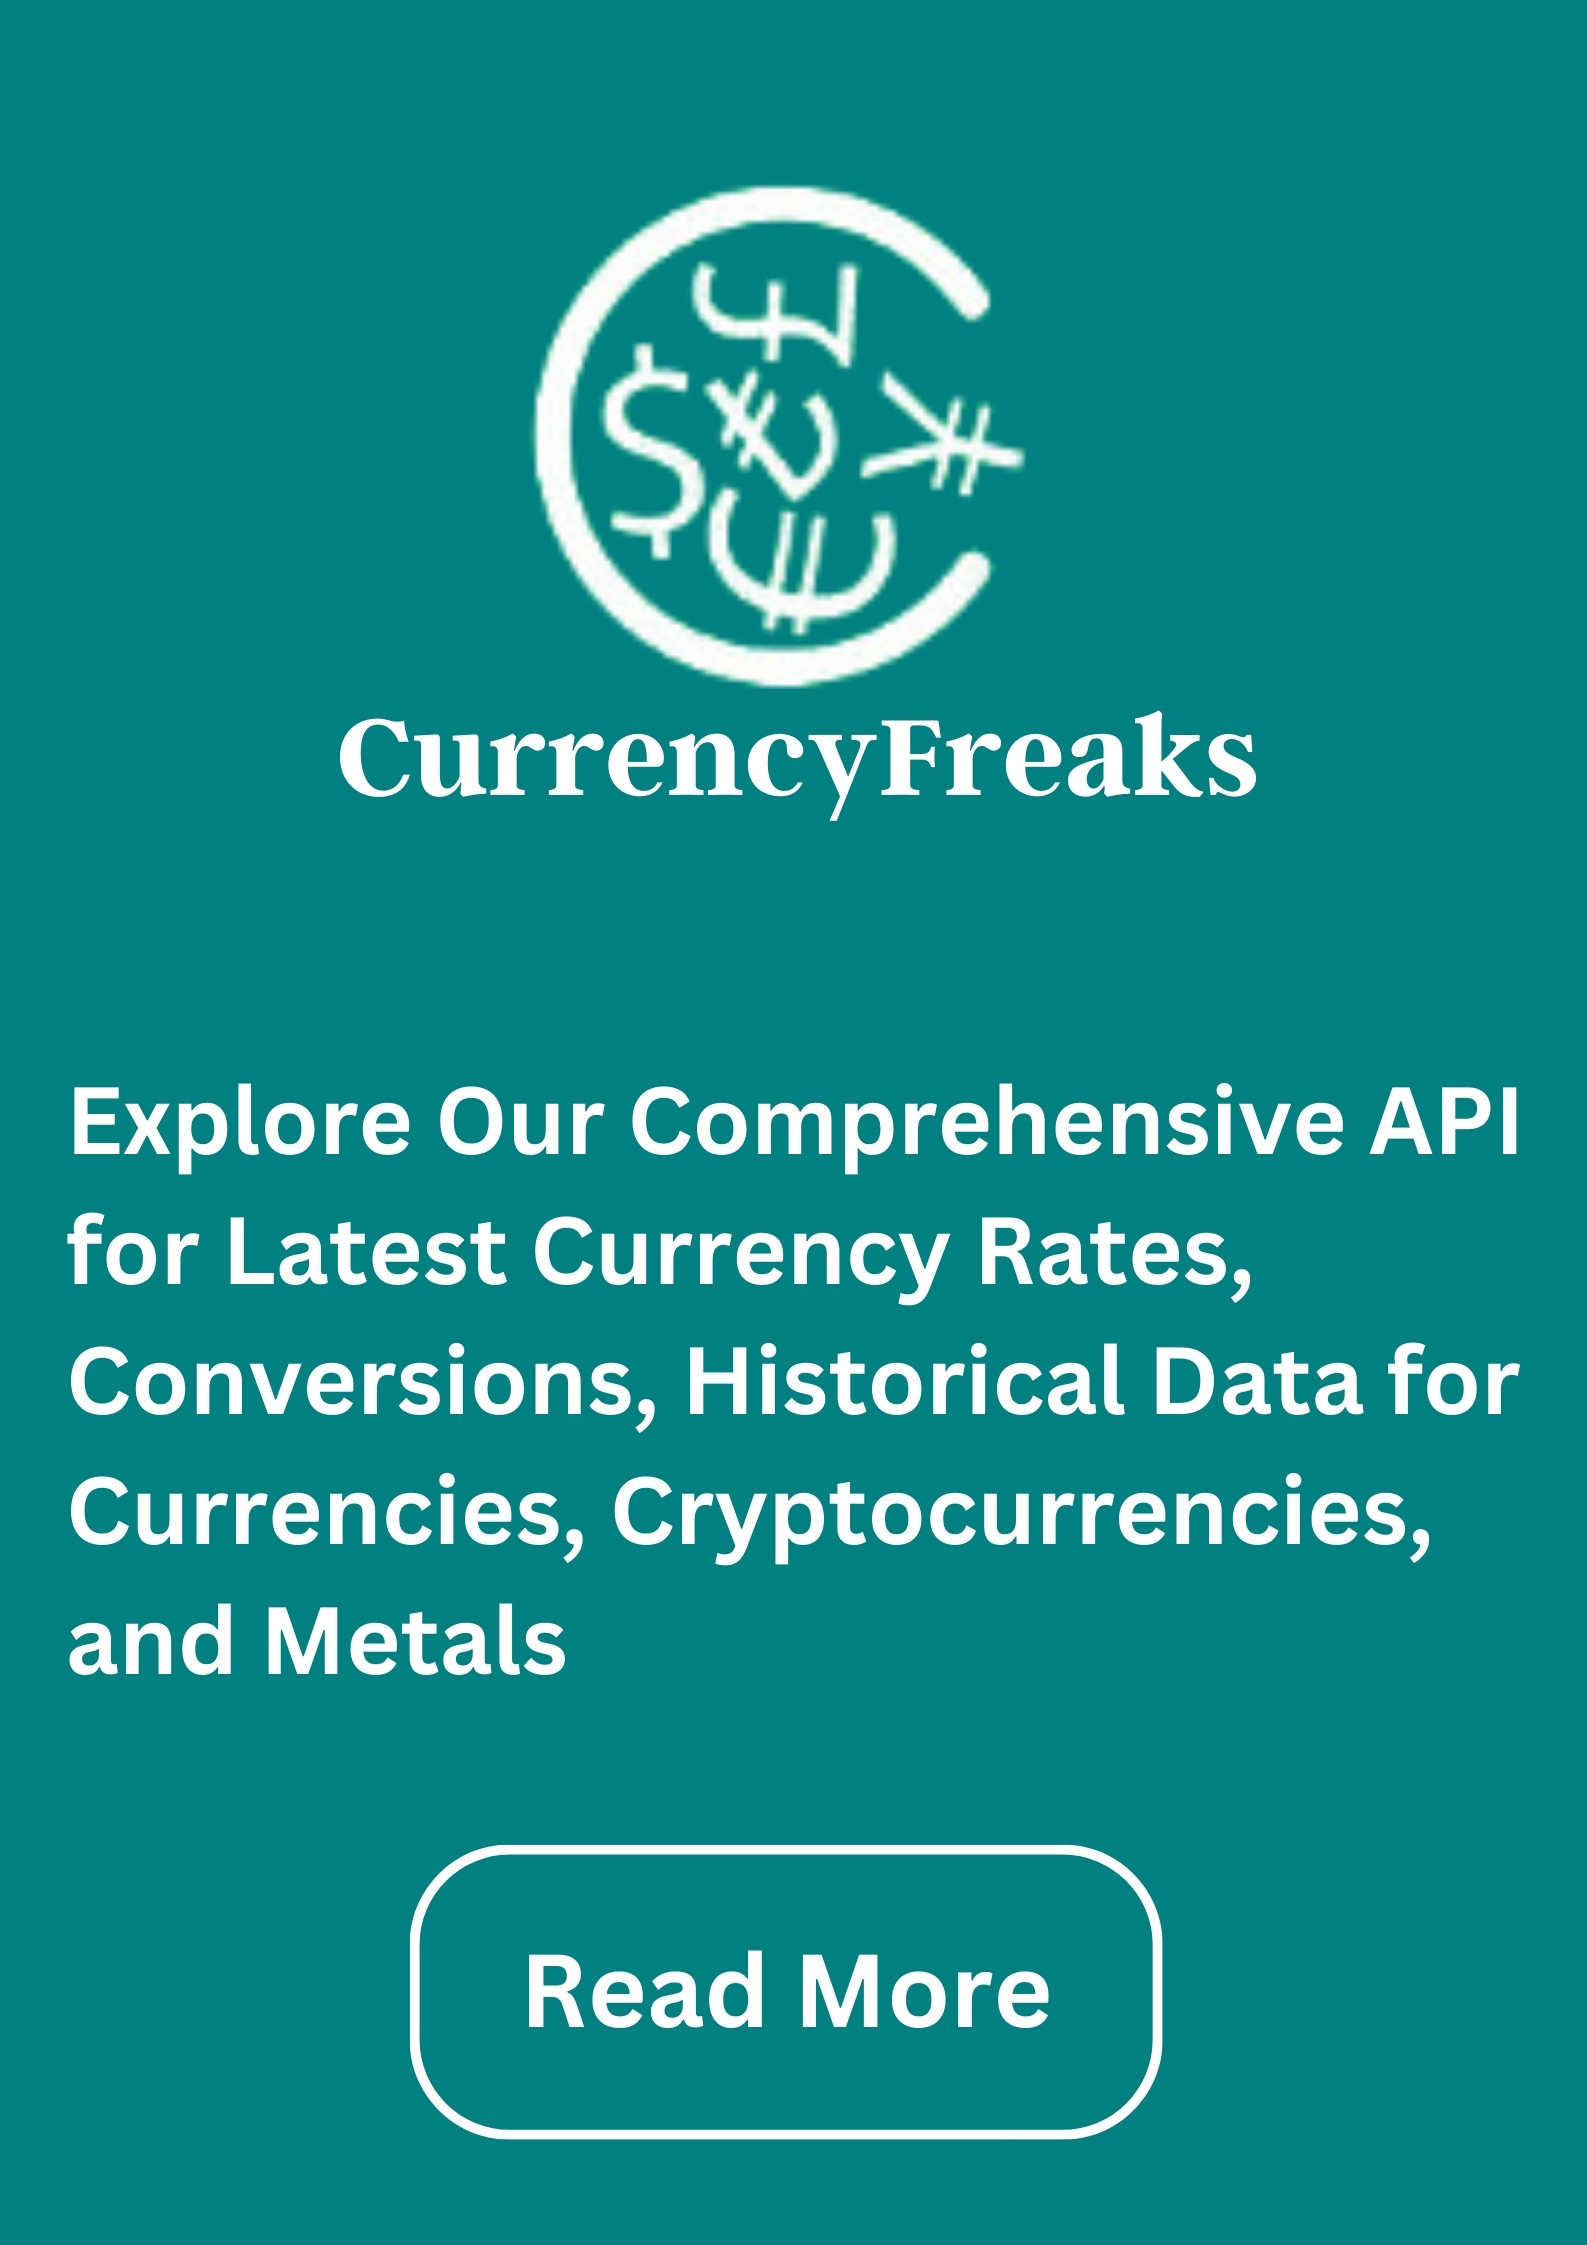 currencyfreaks-banner